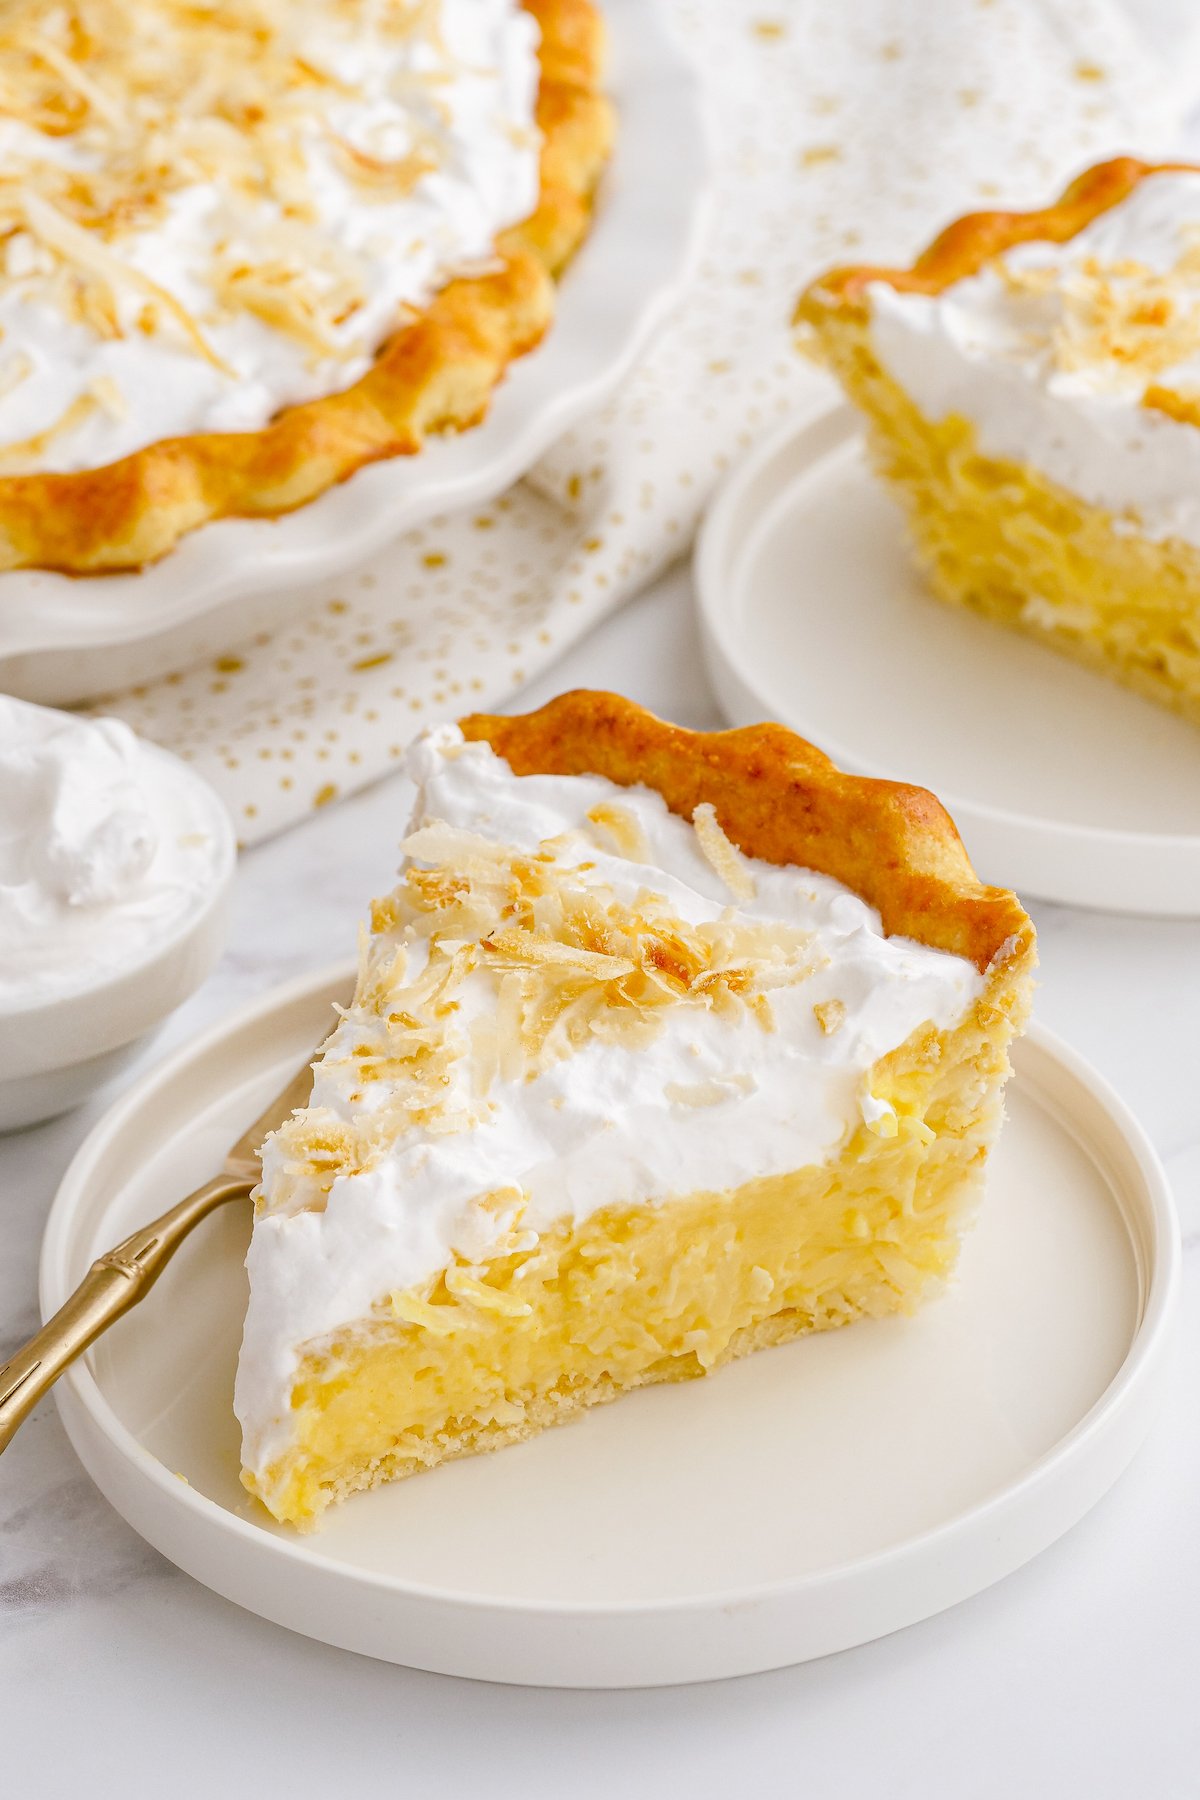 A slice of homemade coconut cream pie on a white plate with a fork.